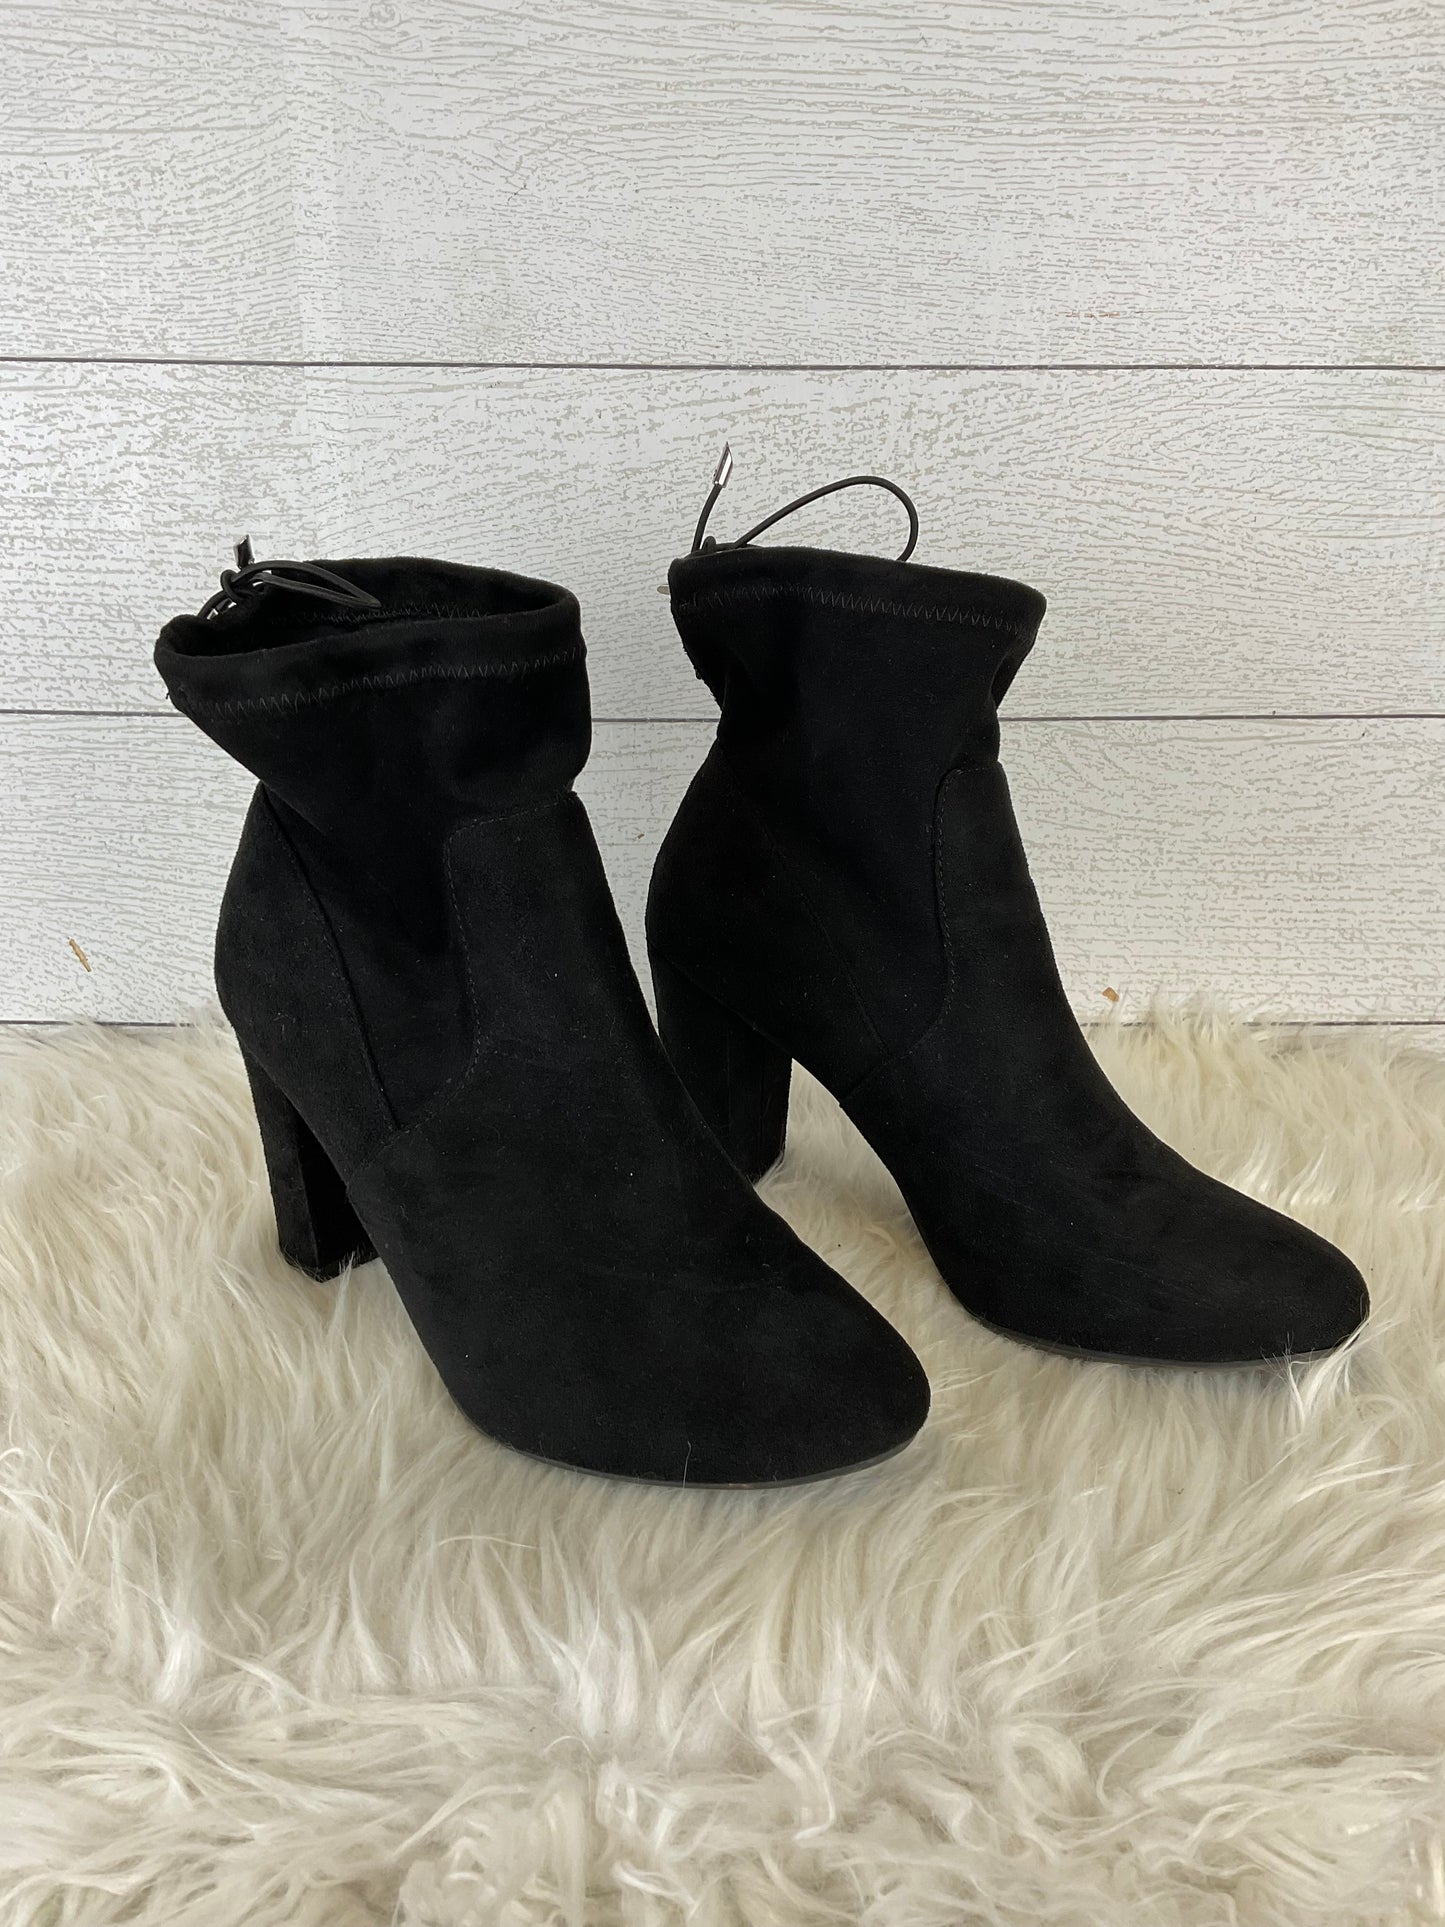 Boots Ankle Heels By Nine West  Size: 10